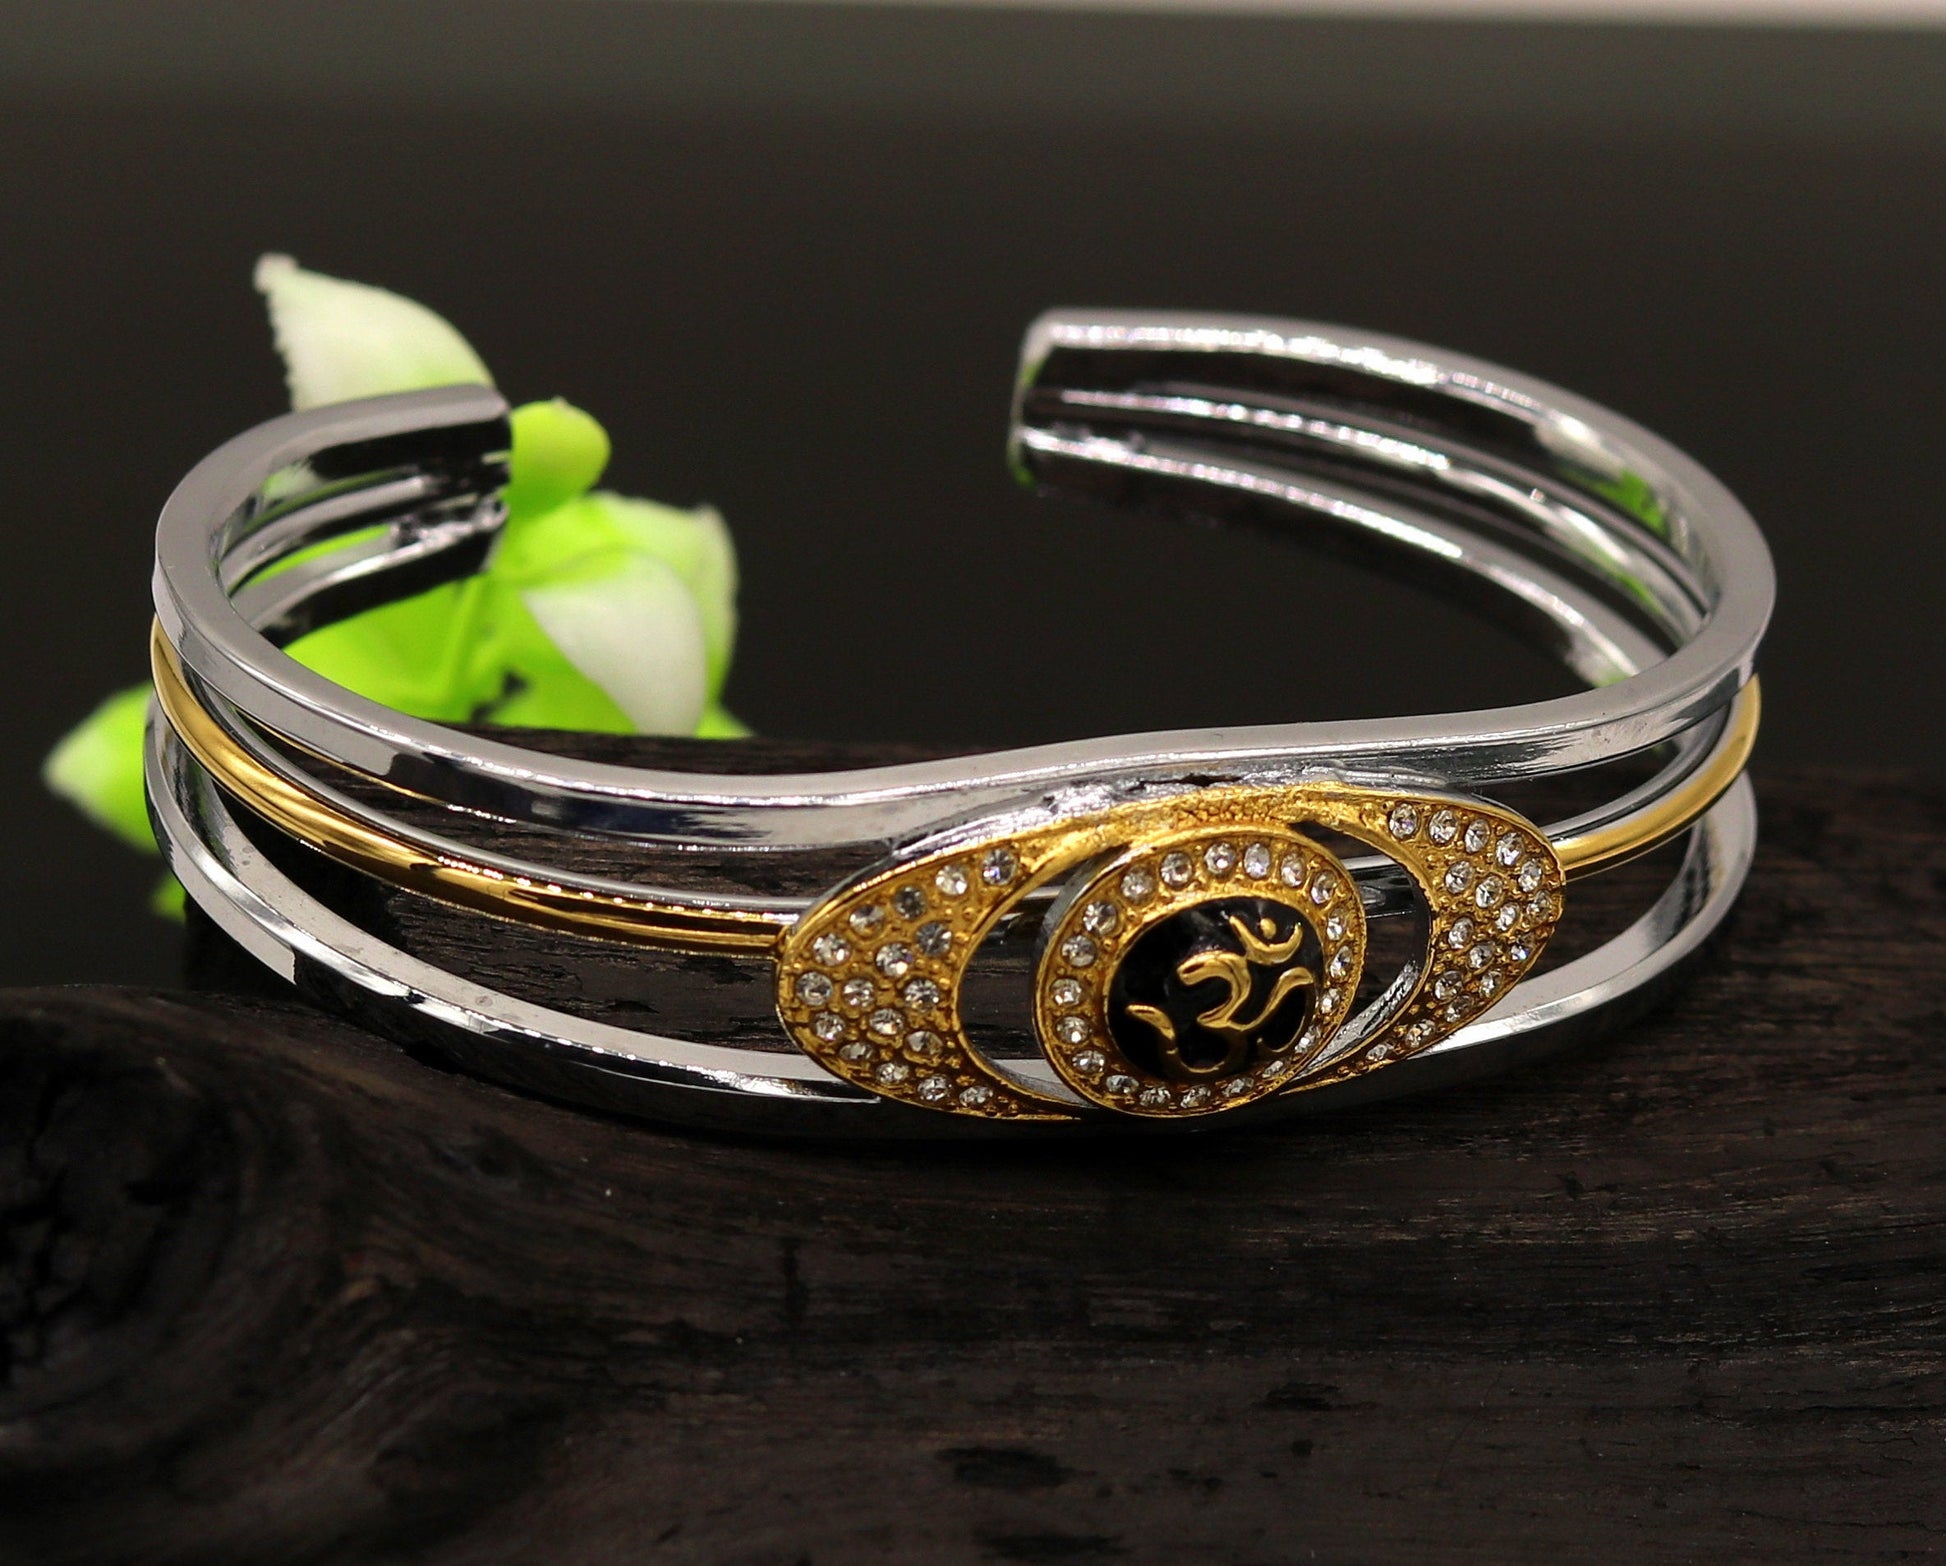 Sterling silver handmade 'Aum' design gold plated design unisex bangle bracelet kada, awesome adjustable customized gifting jewelry nsk304 - TRIBAL ORNAMENTS